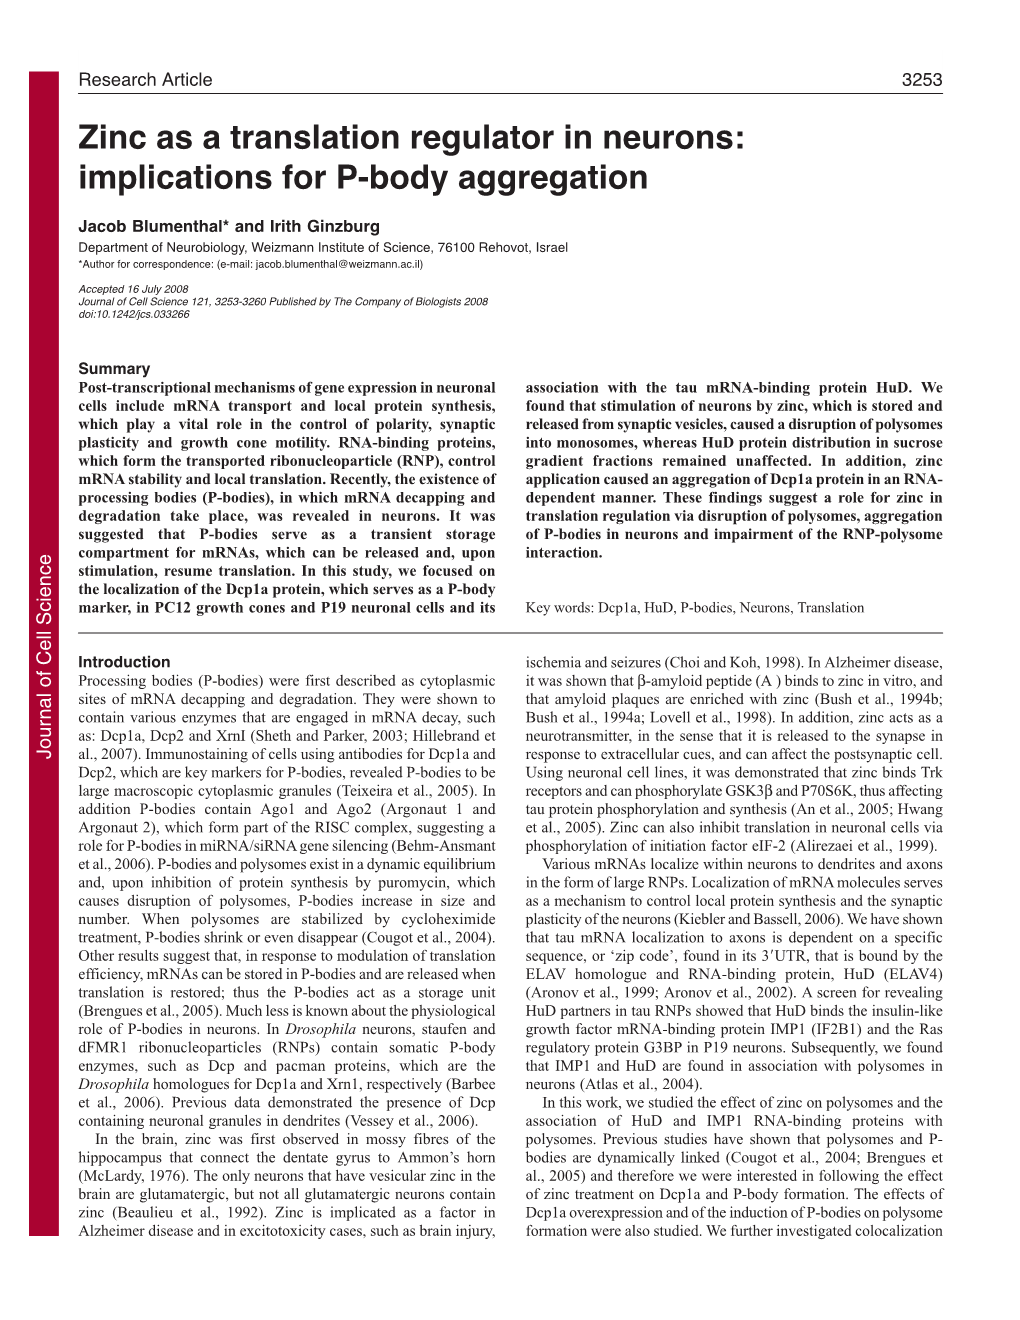 Zinc As a Translation Regulator in Neurons: Implications for P-Body Aggregation